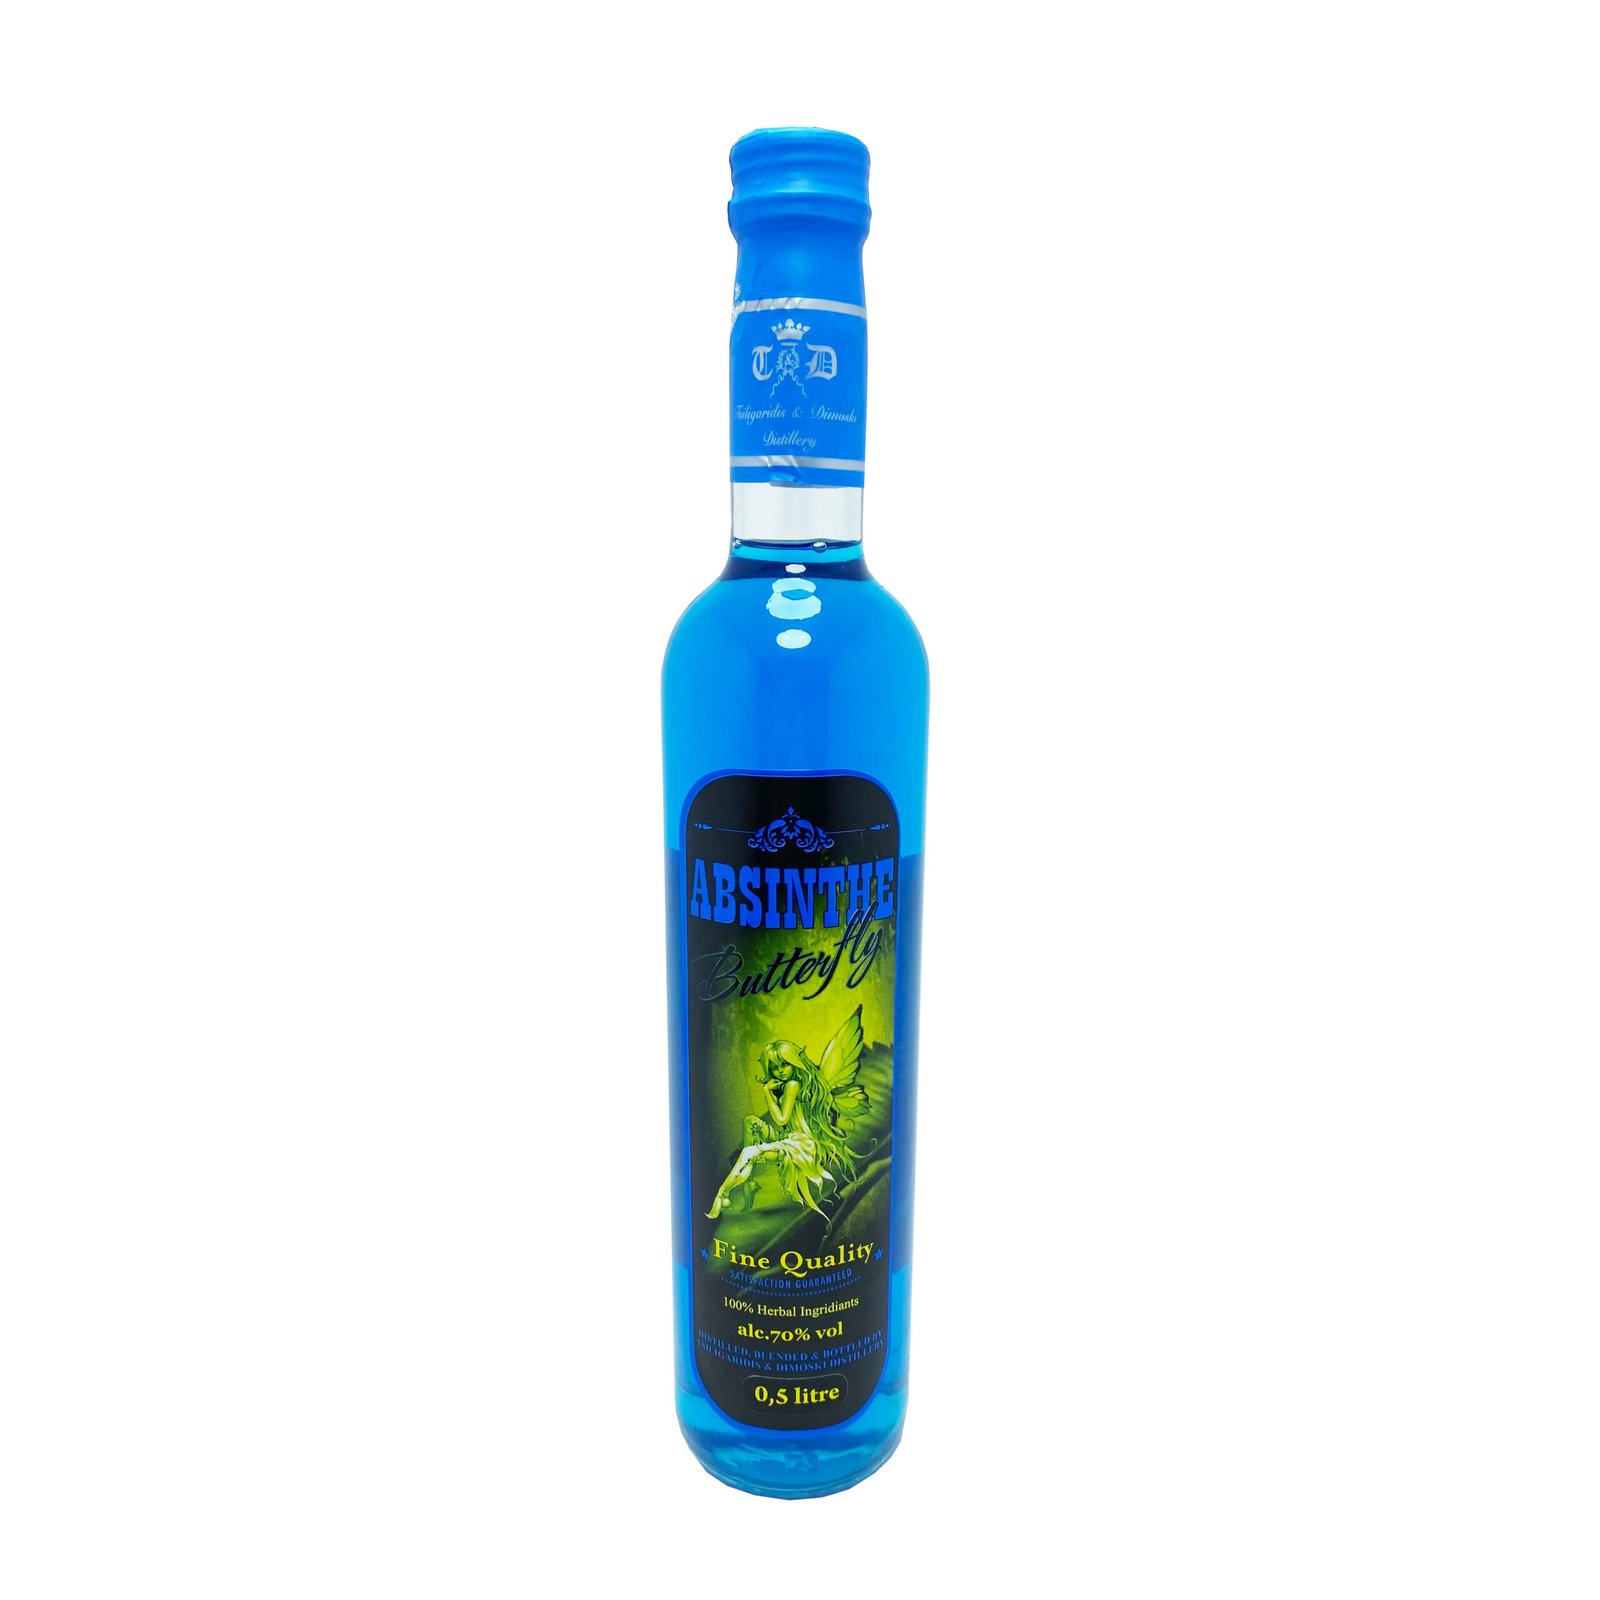 Absinthe Butterfly 65% alcohol 750ml - 飲料/酒